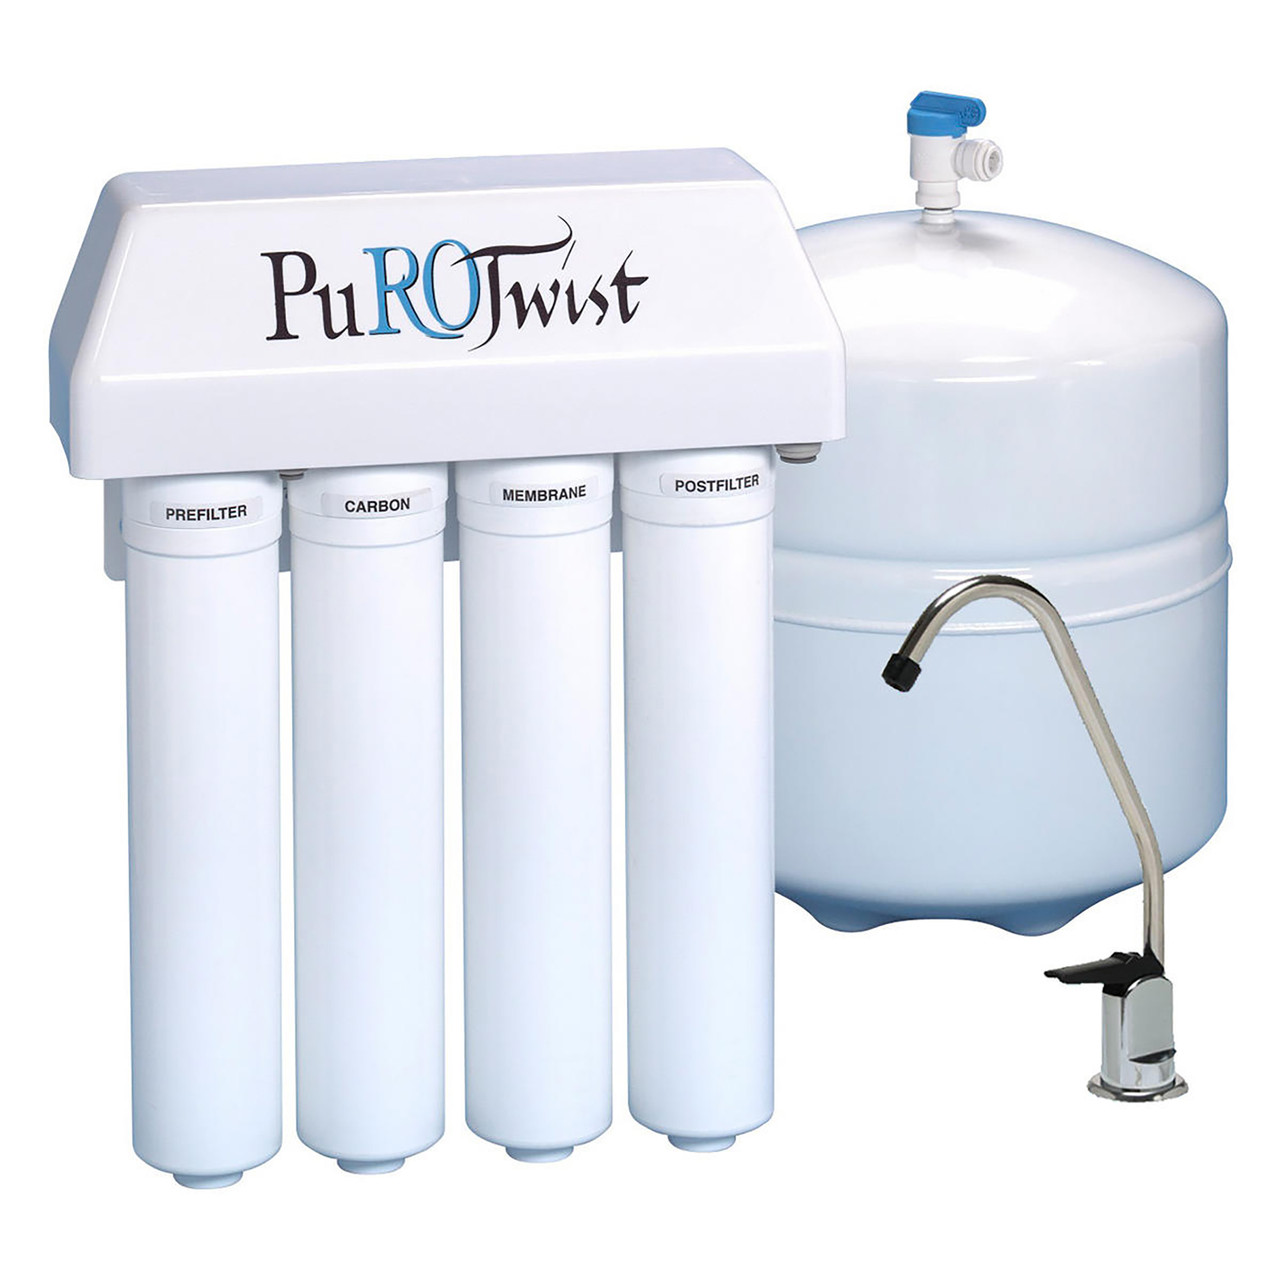 https://cdn11.bigcommerce.com/s-mre1mh/products/5163/images/5951/purotwist-purotwist-4000-reverse-osmosis-50-gpd-4-stage-system-pt4000t50-ss-pt4000t50-ss__07600.1691504955.1280.1280.jpg?c=2